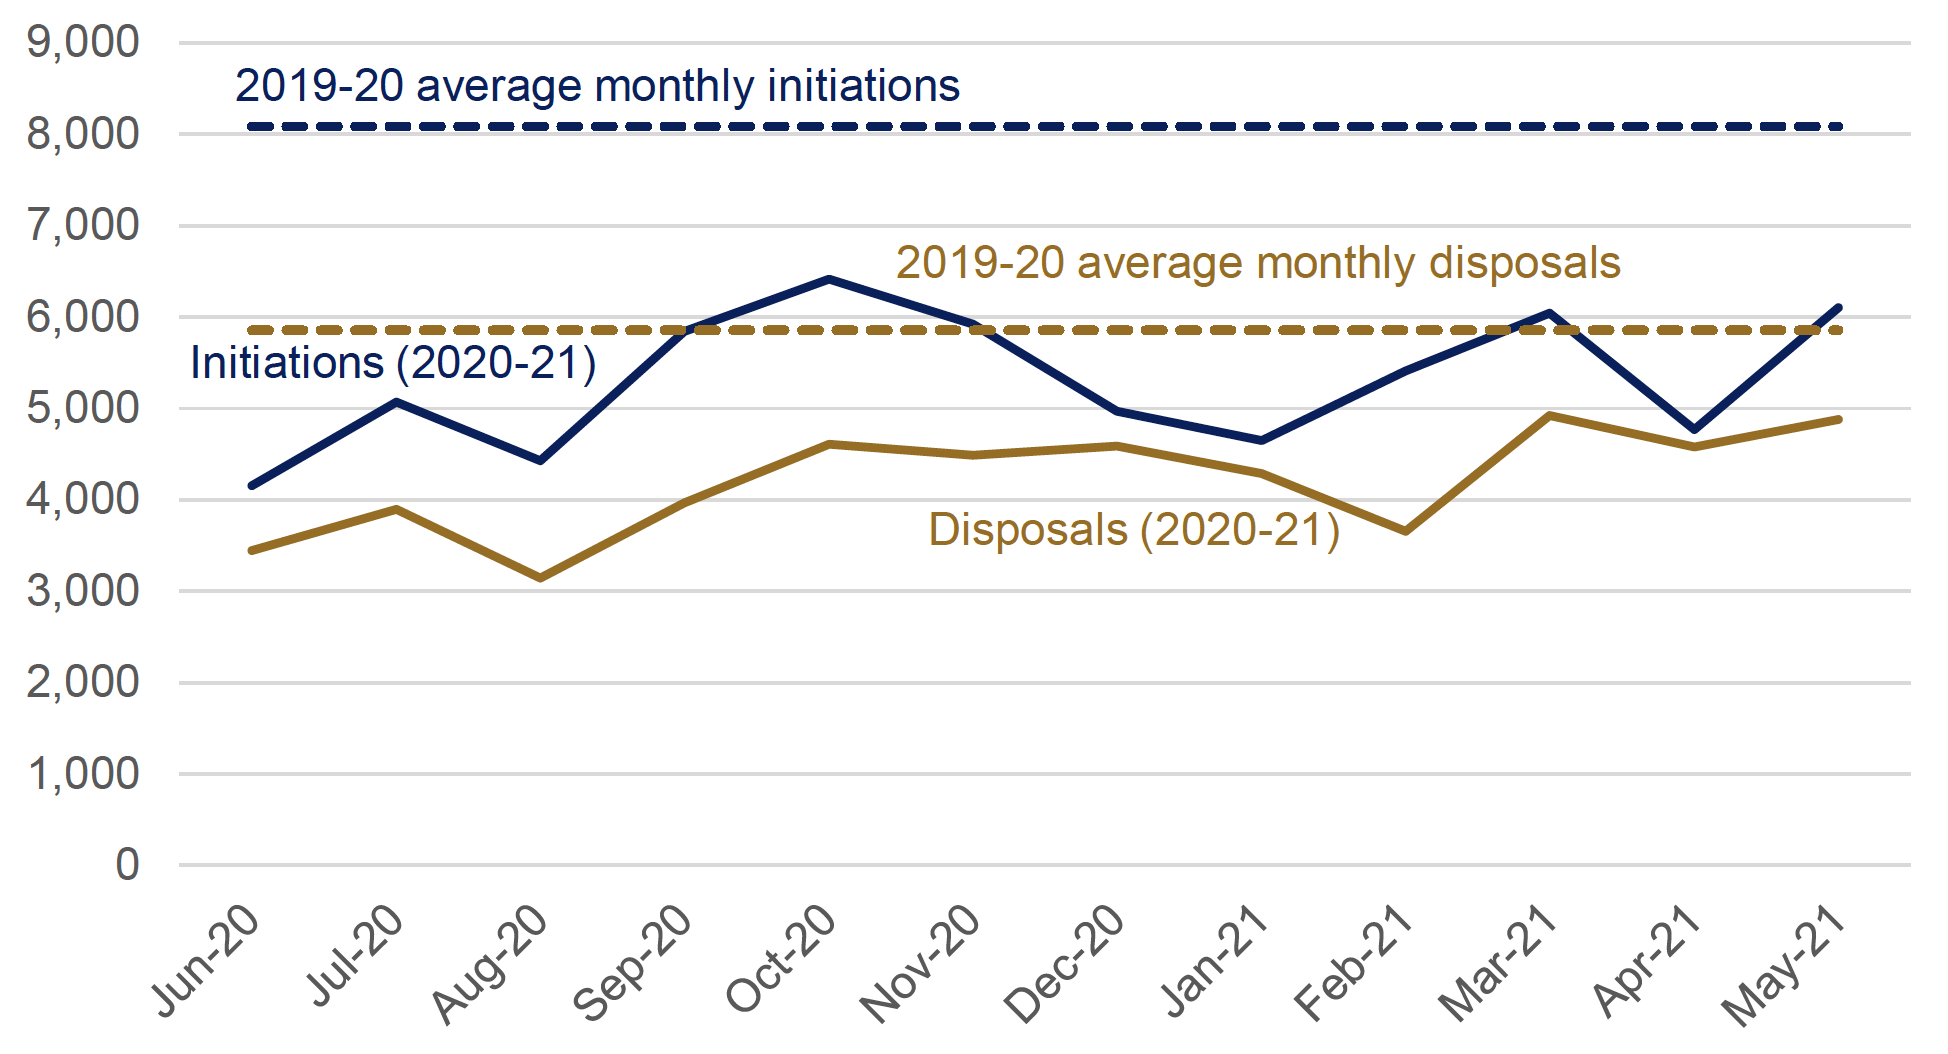 Line graph showing case volumes remain low, but are recovering to 2019-20 levels.